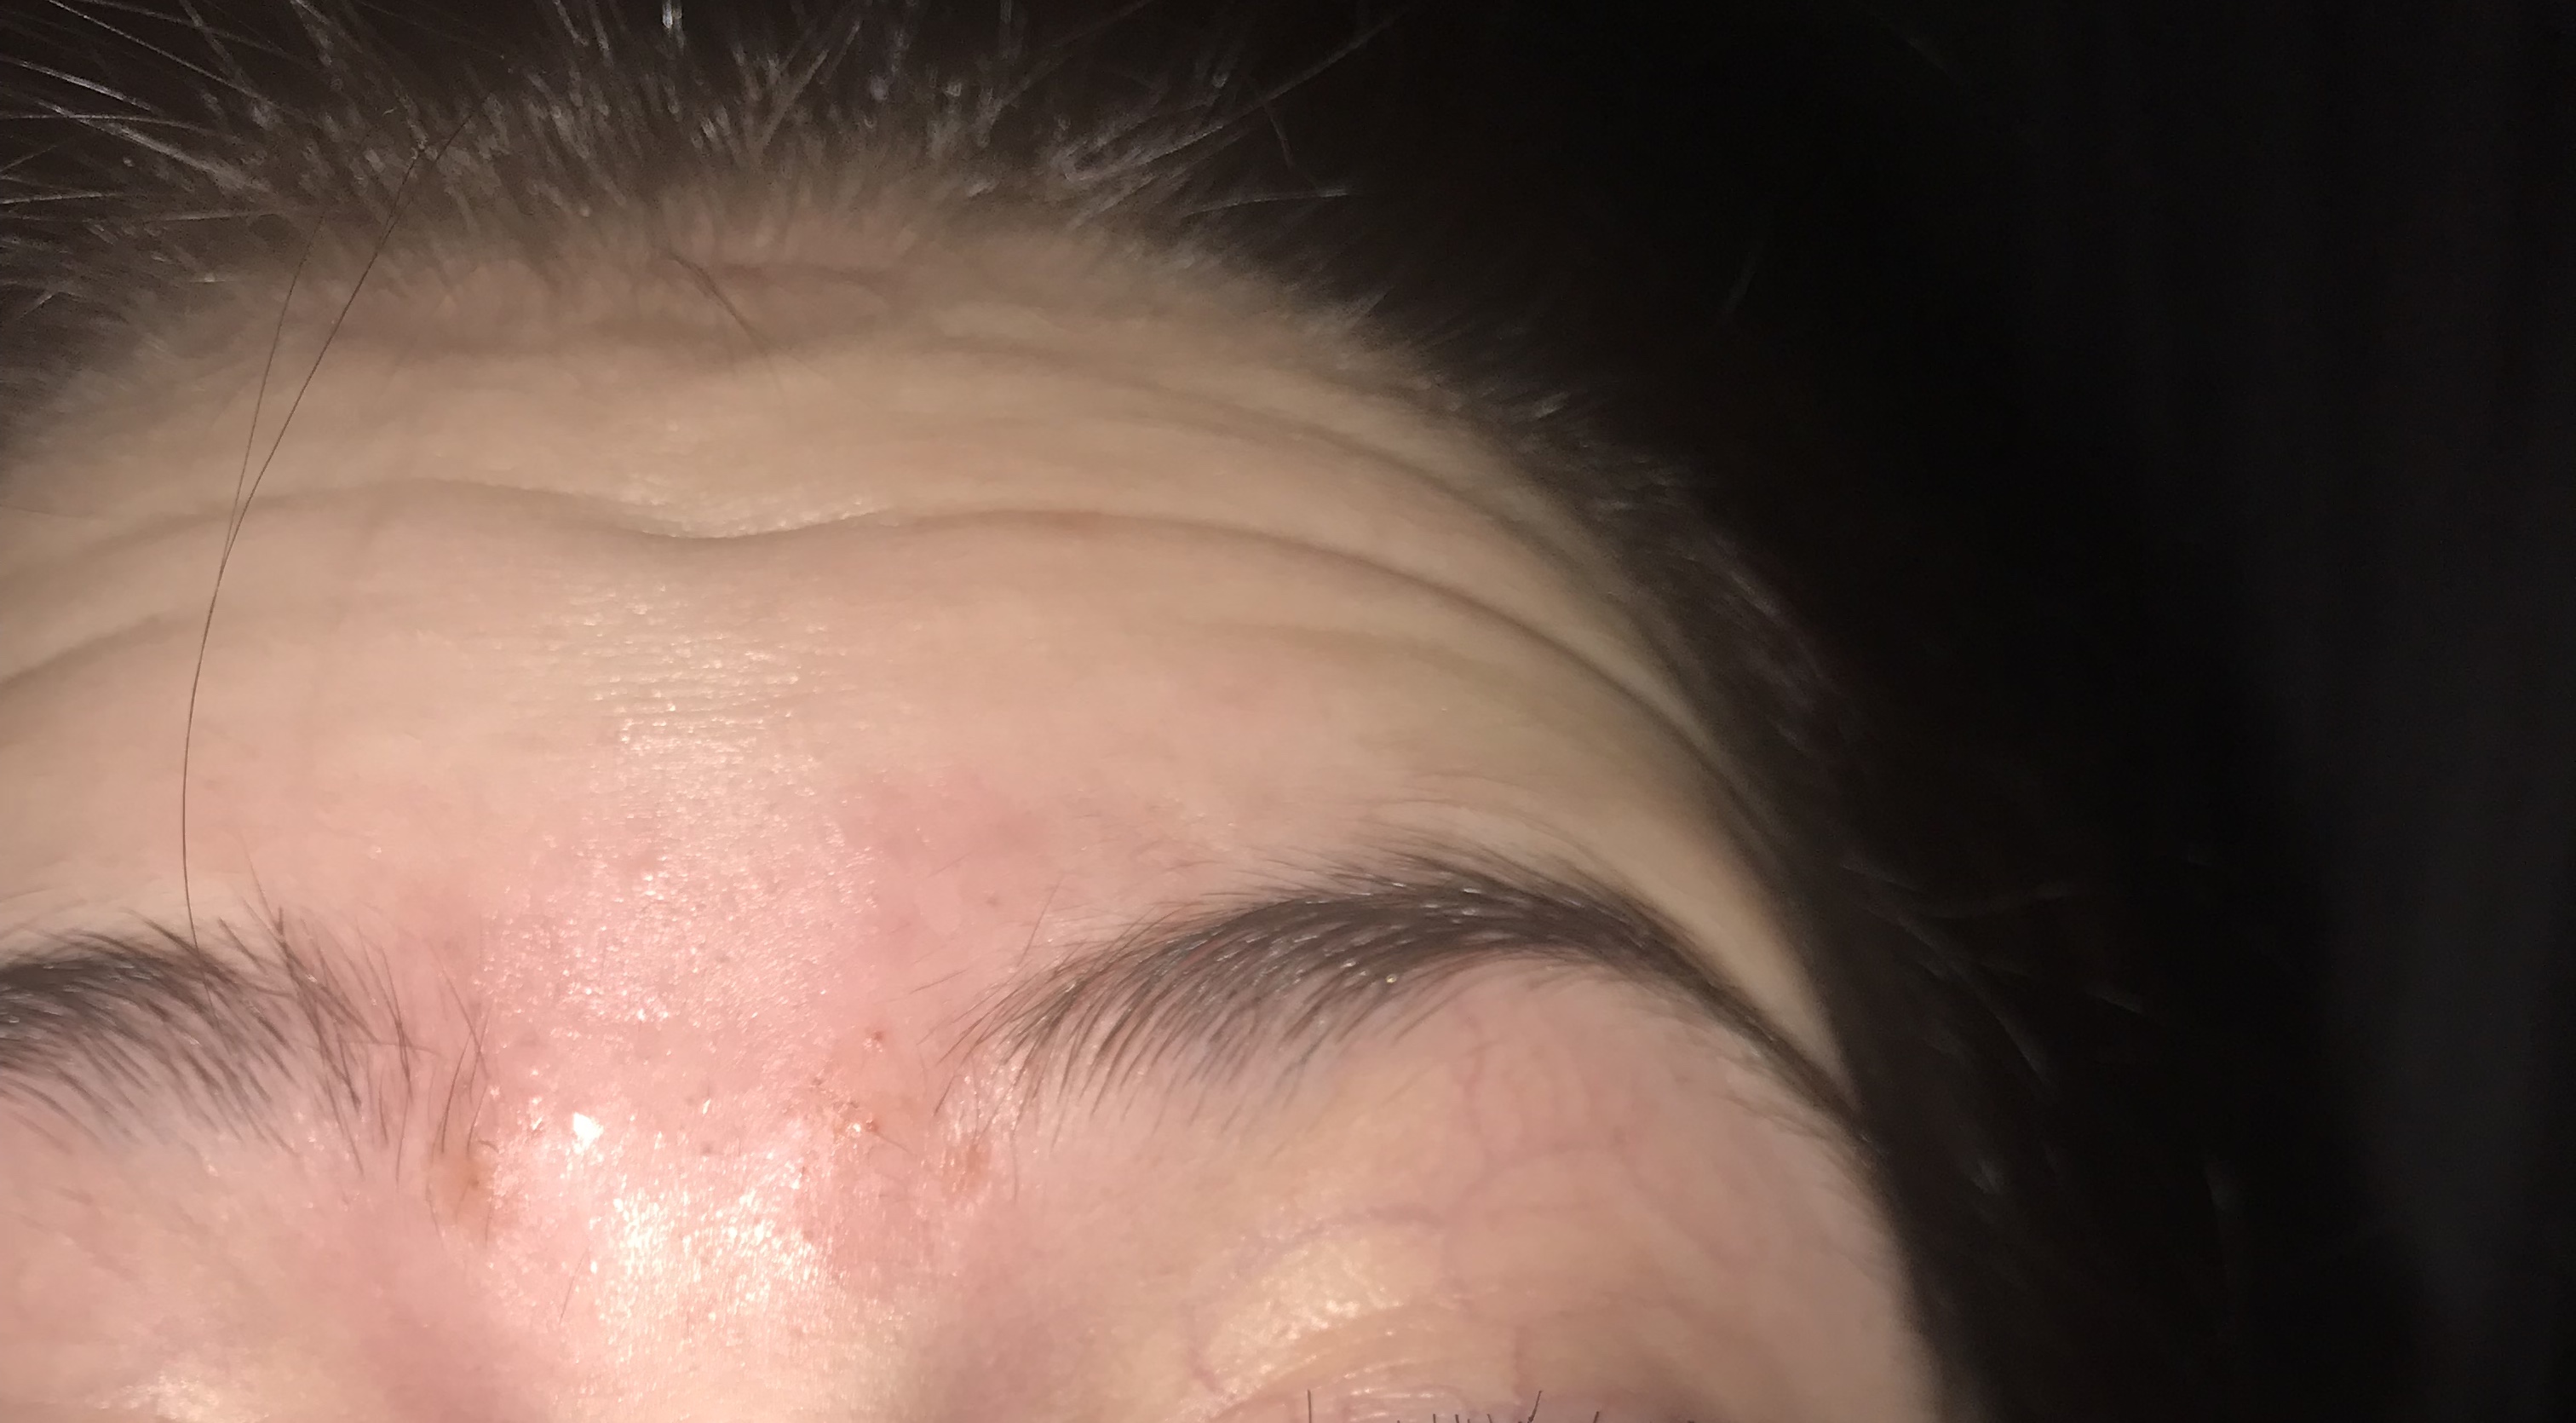 So many hard lumps between eyebrows that have pus in them? - General